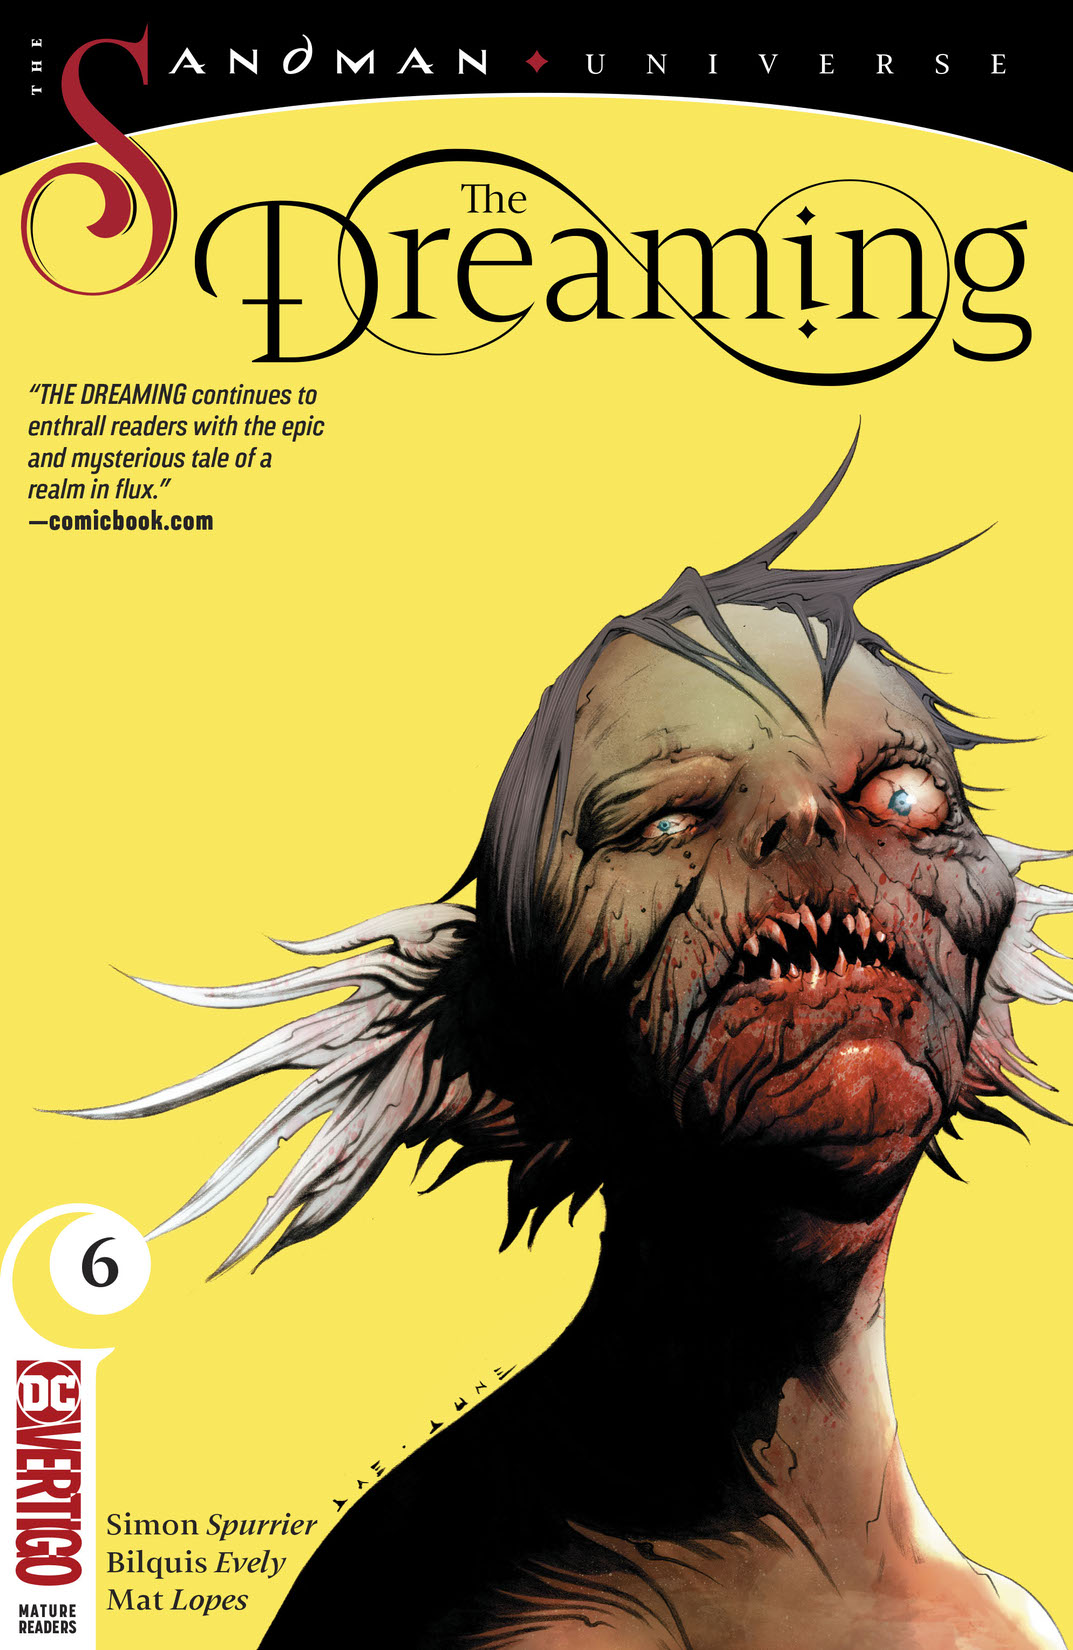 The Dreaming #6 preview images